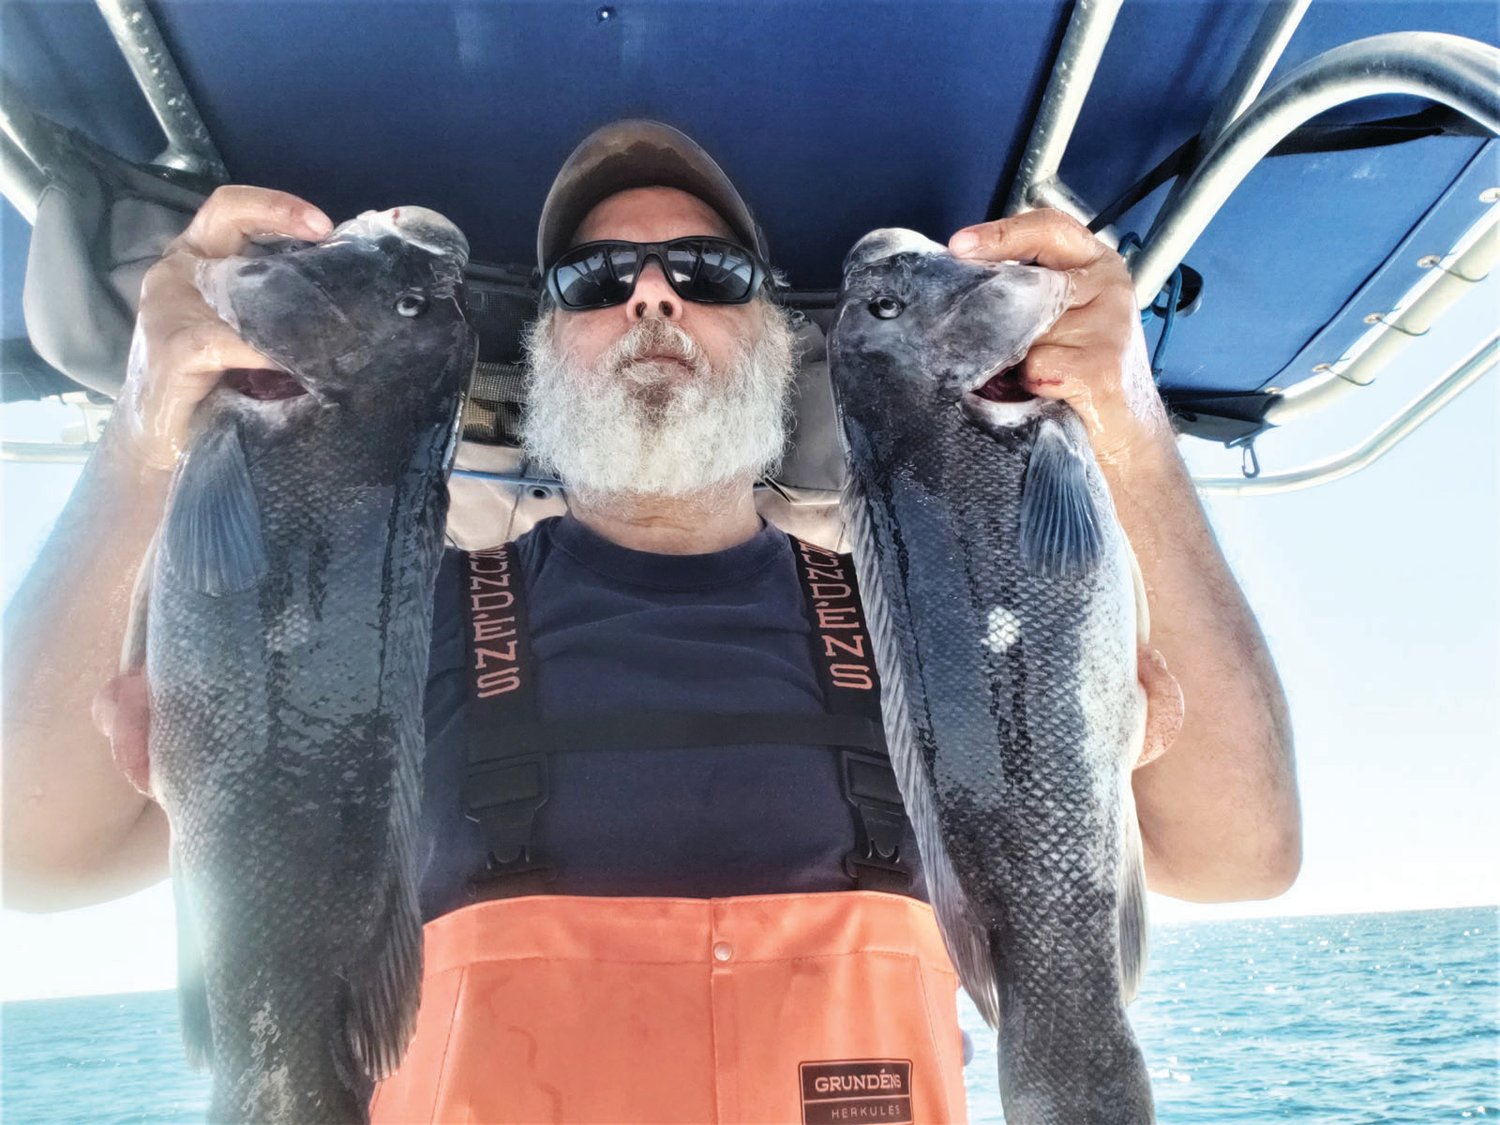 TAUTOG BITE IMPROVING:  Paul Phillips of North Kingstown with tautog he caught earlier this year. He fished Monday off Newport and caught 42 tautog several were keepers 16-20 inches.